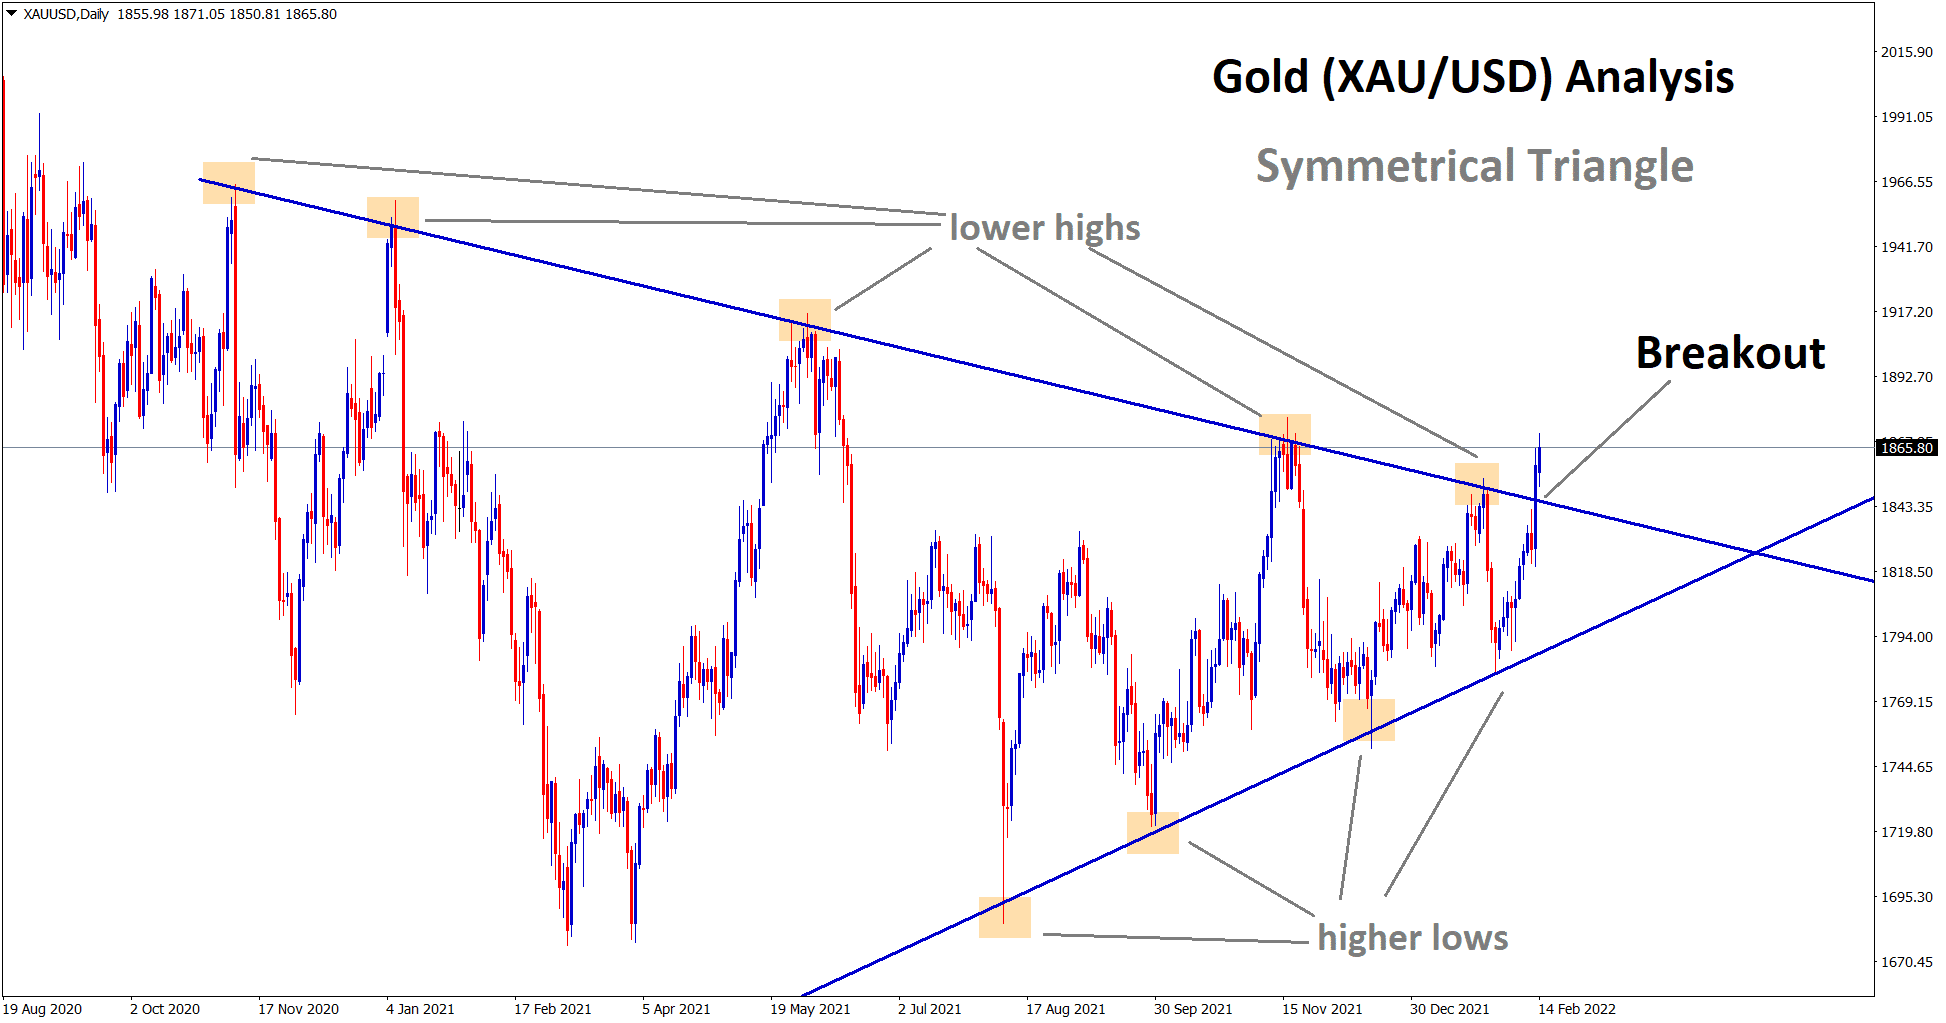 Gold symmetrical Triangle breakout in daily timeframe chart